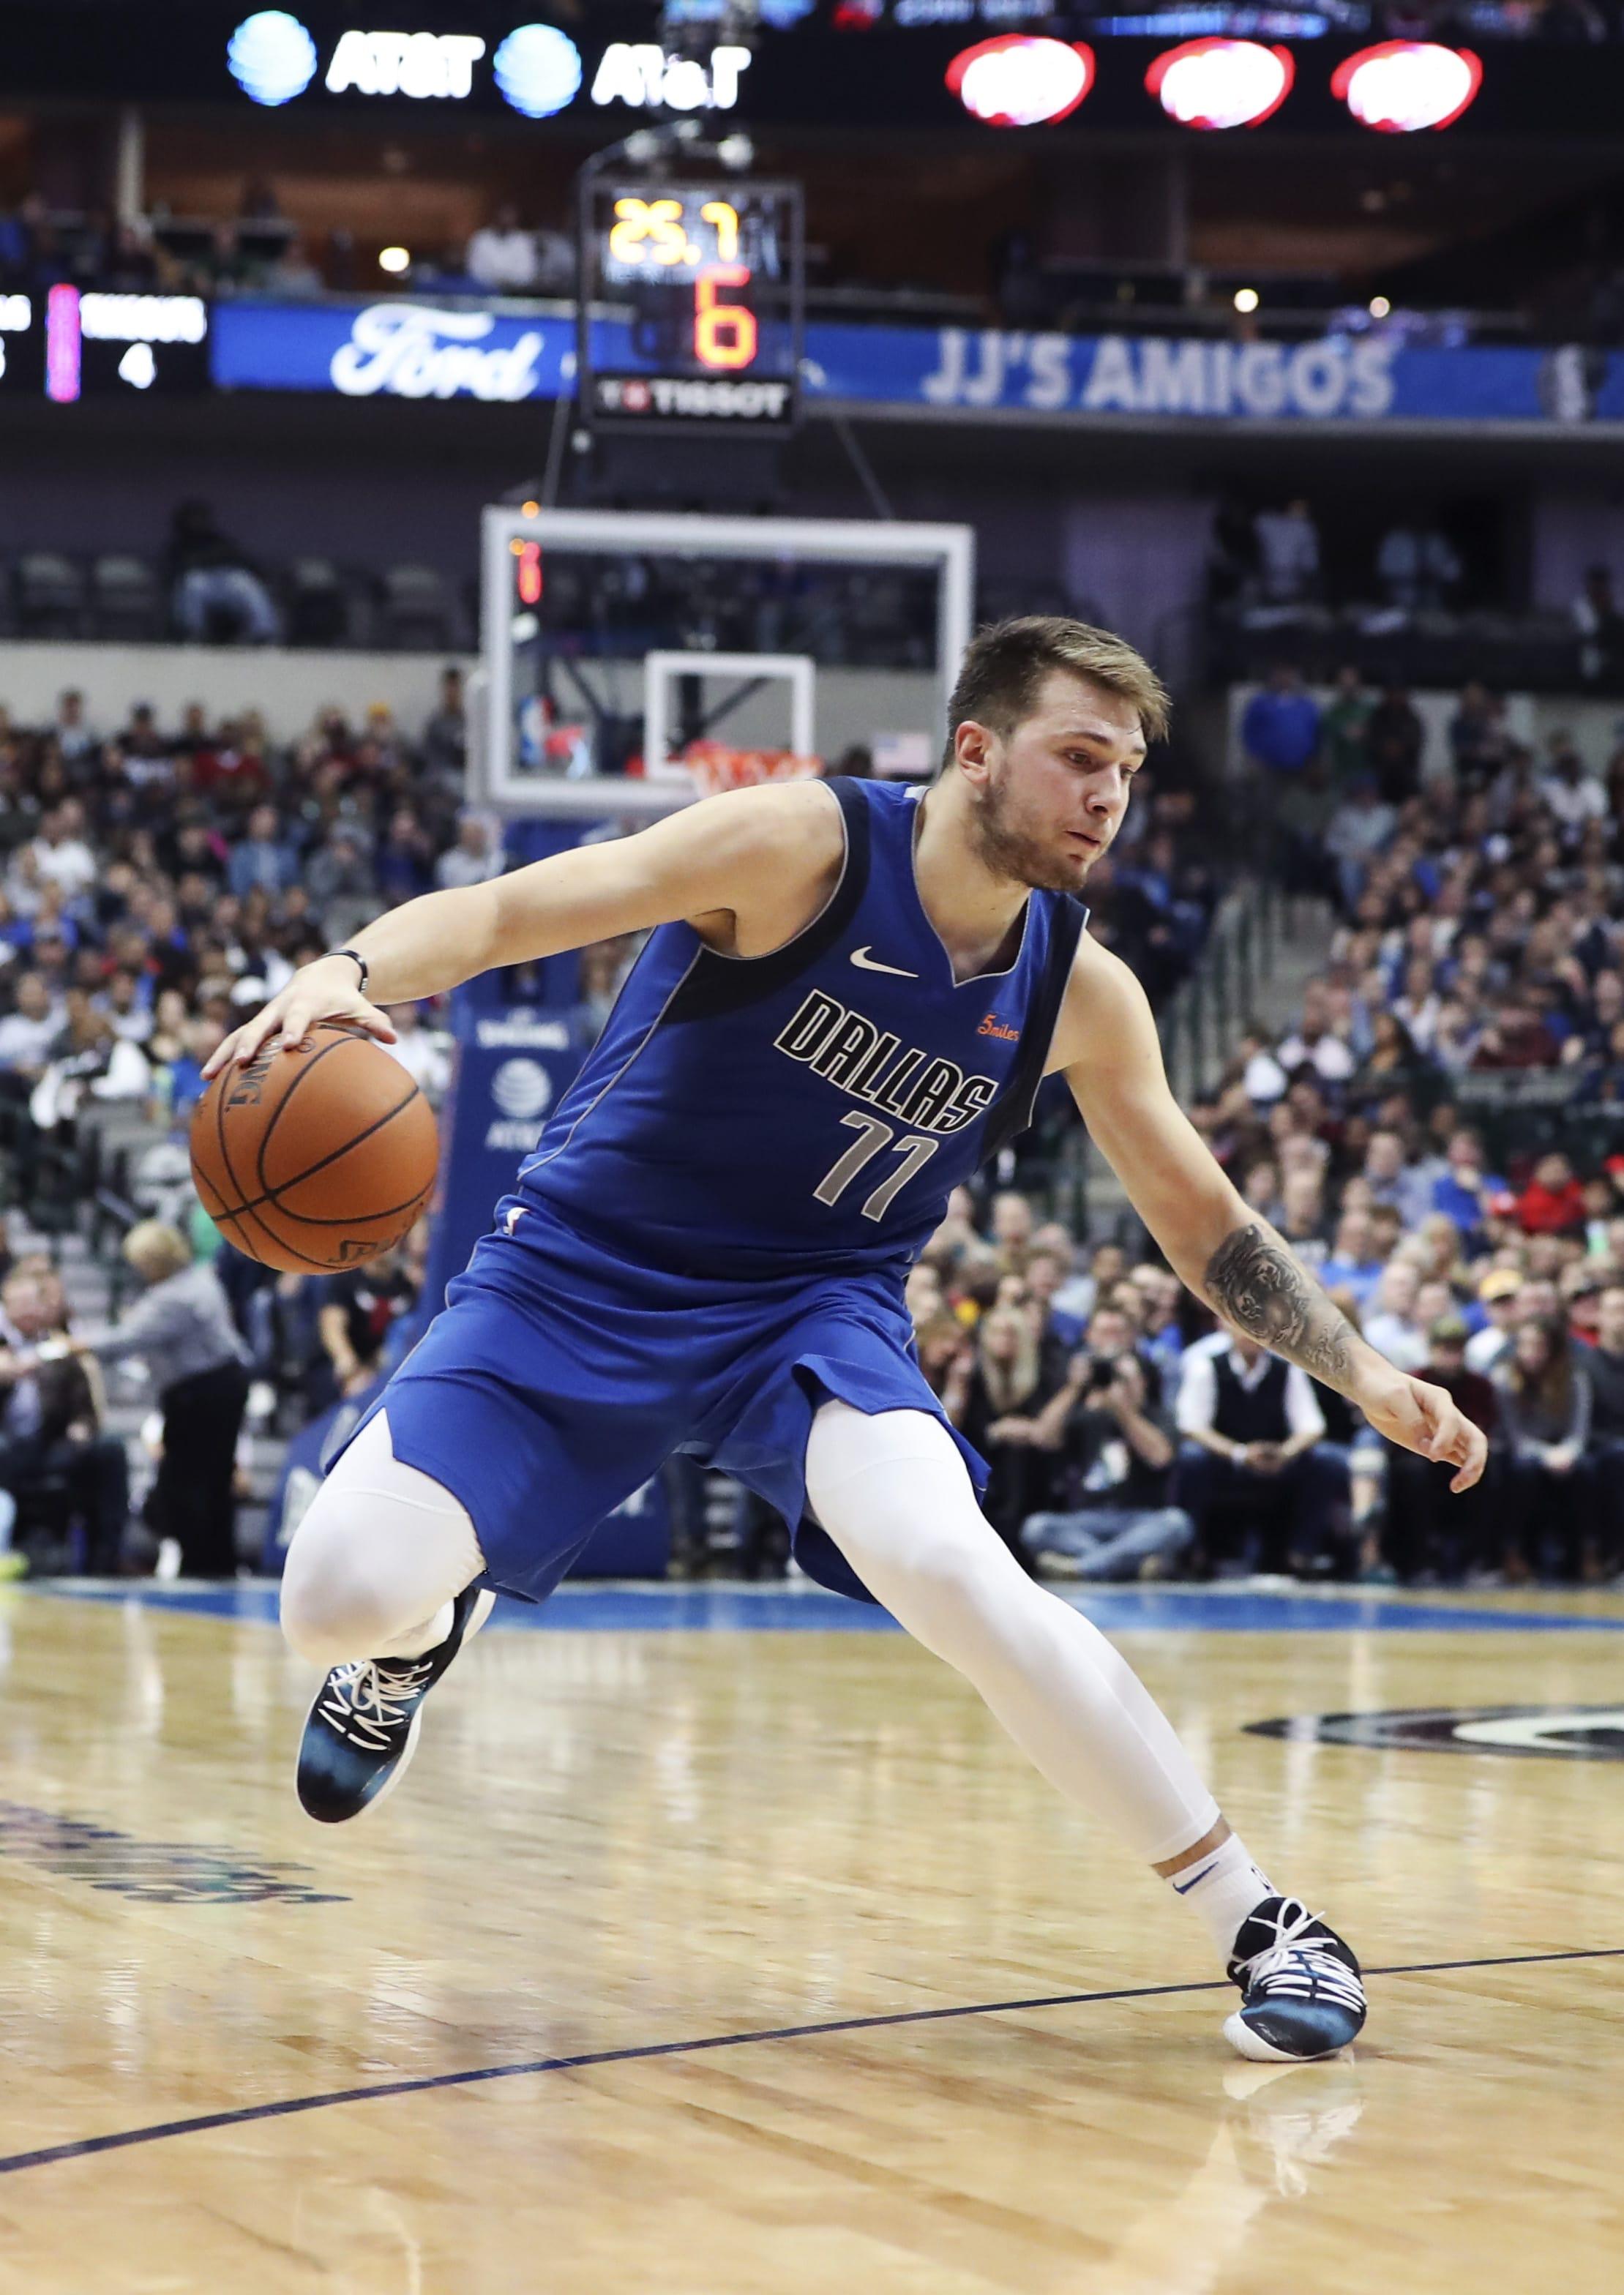 Luka Doncic's stepback isn't just his signature shot, but a